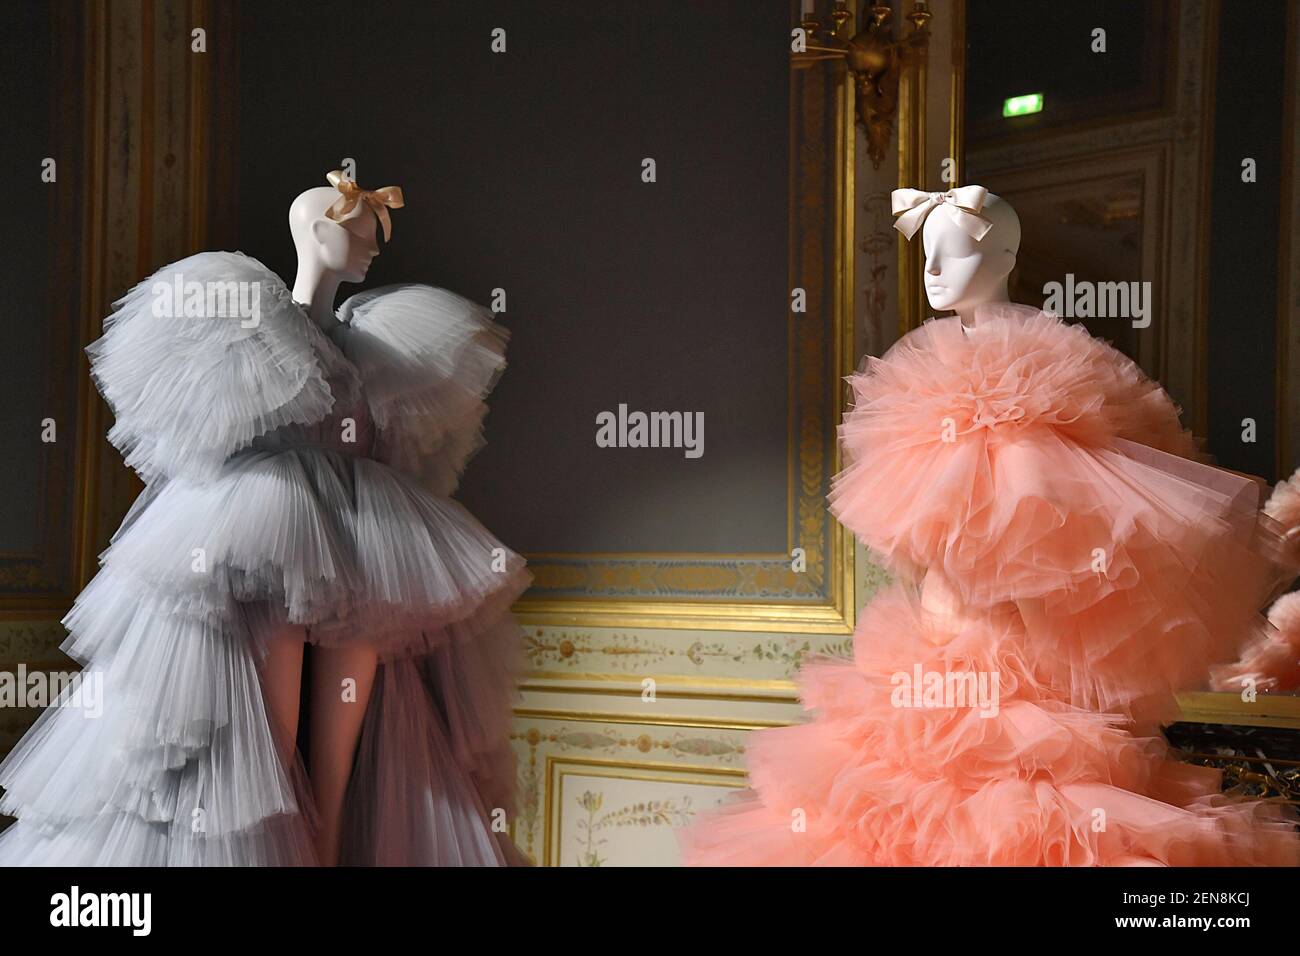 A model walks on the runway during the Giambattista Valli Paris Haute Couture Fall Winter 2019 / 2020 Fashion Show held in Paris, France on July 1, 2019. (Photo by Jonas Gustavsson/Sipa USA) Stock Photo